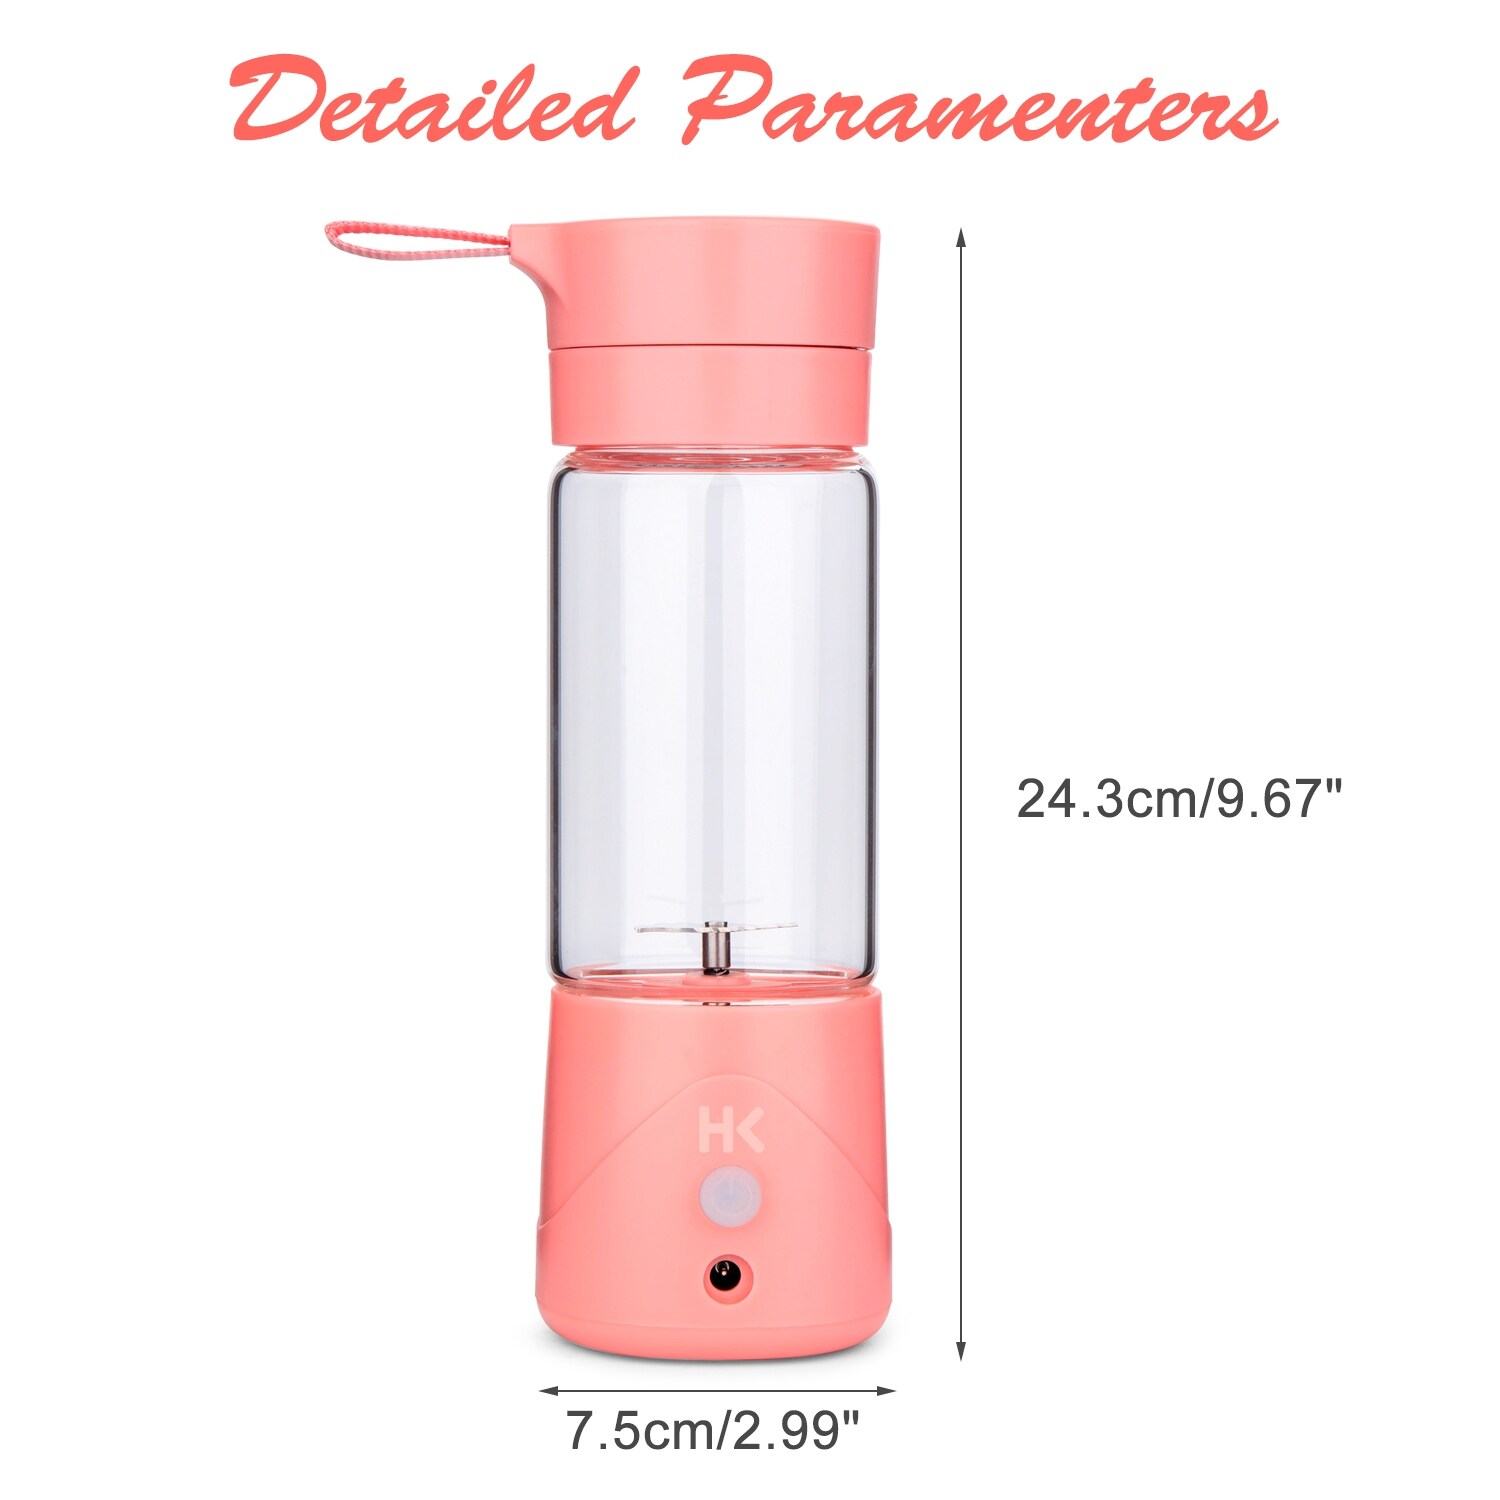 https://ak1.ostkcdn.com/images/products/is/images/direct/7c7d1c9b2eb4371de2769c727e59abe2ad753fa8/US-Portable-Rechargeable-Jet-Squeezers-Juicer-Mixer-Blend-Personal-Blender-Cup.jpg